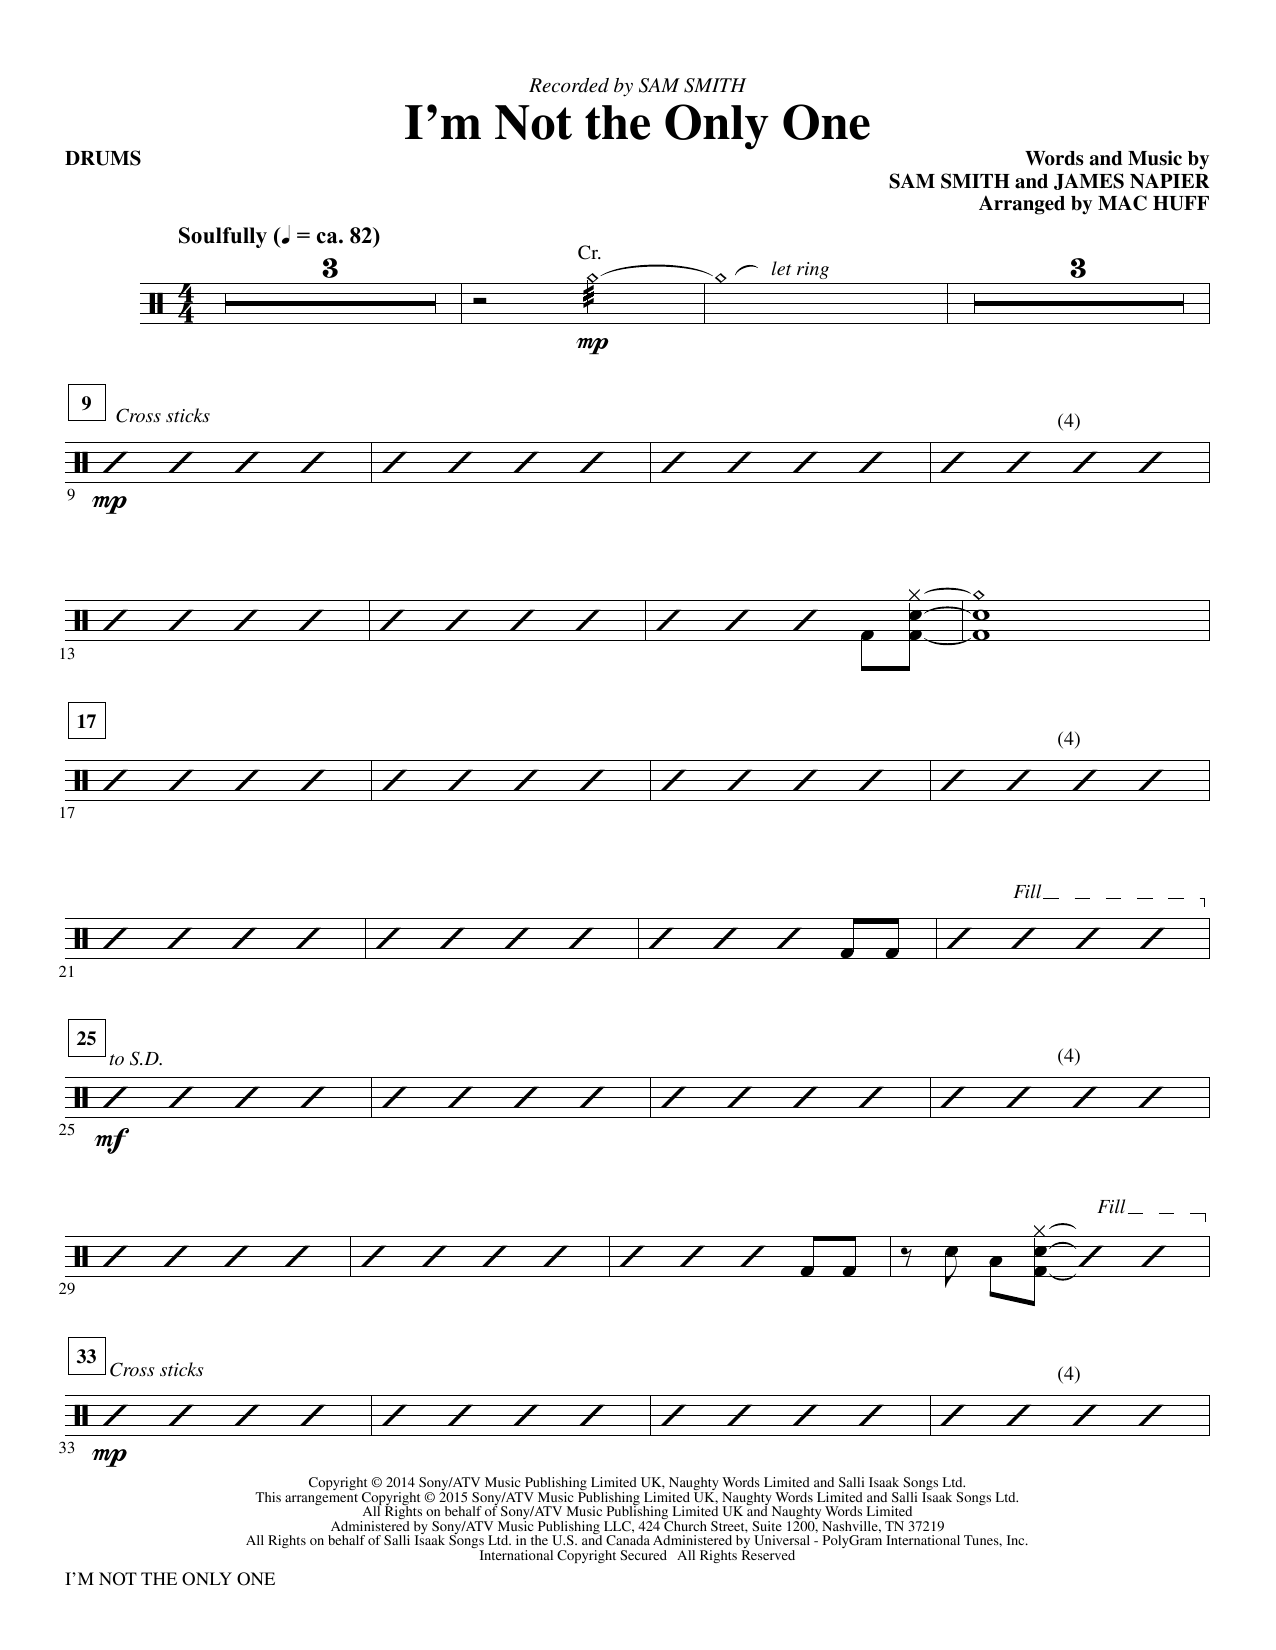 Mac Huff I'm Not the Only One - Drums sheet music notes and chords. Download Printable PDF.